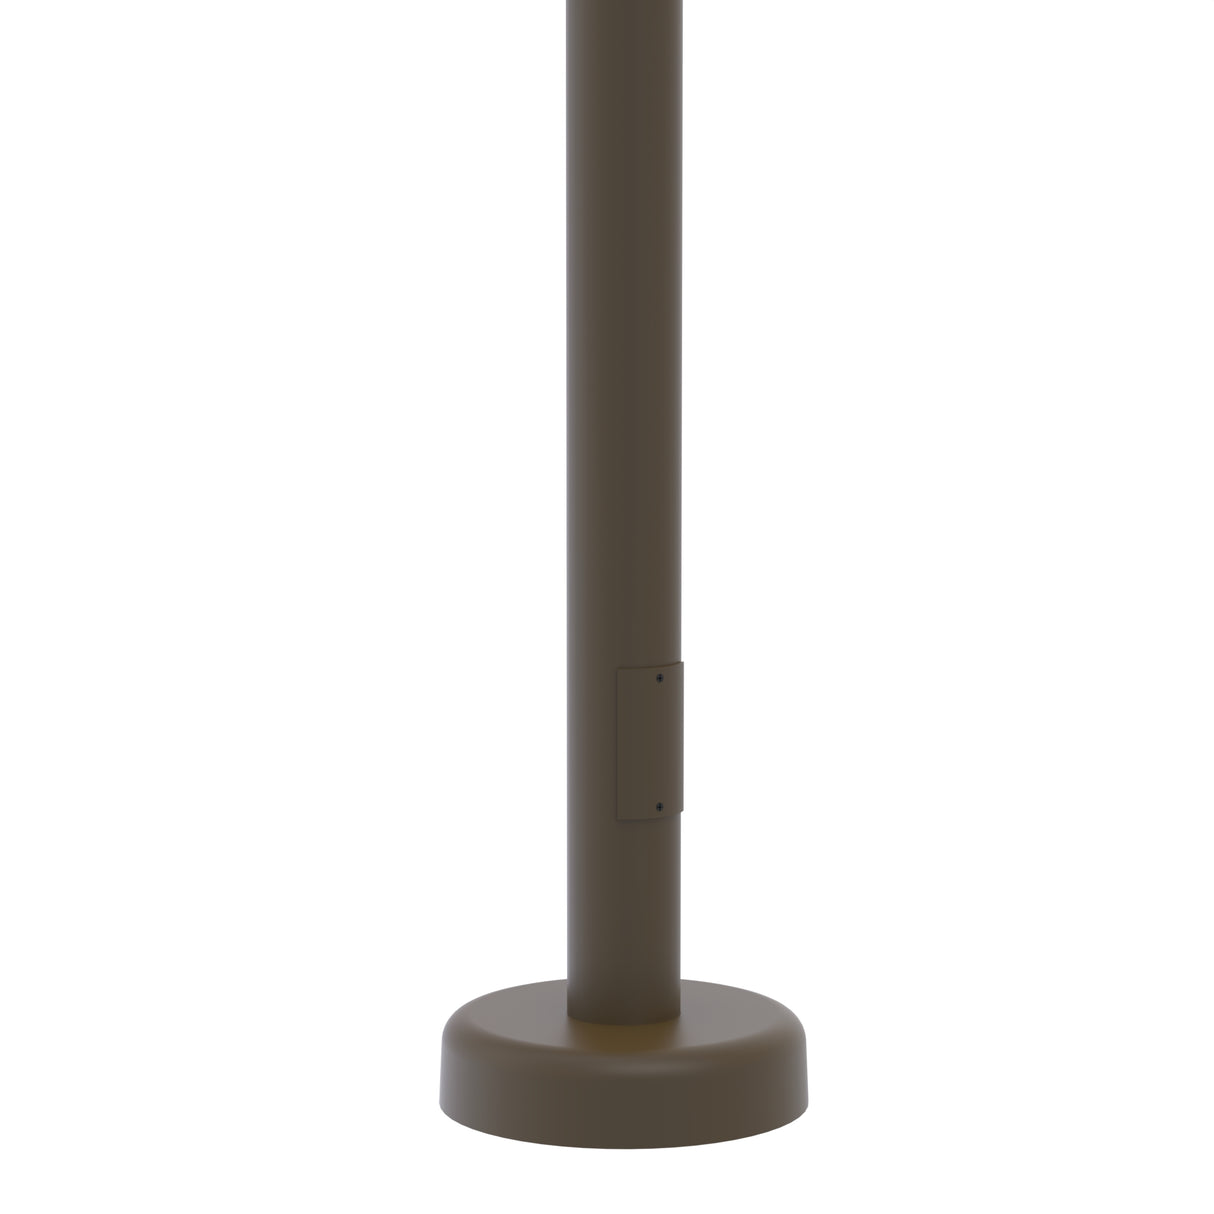 20' Tall x 6.0" OD x 0.156" Thick, Round Straight Aluminum, Hinged Anchor Base Light Pole